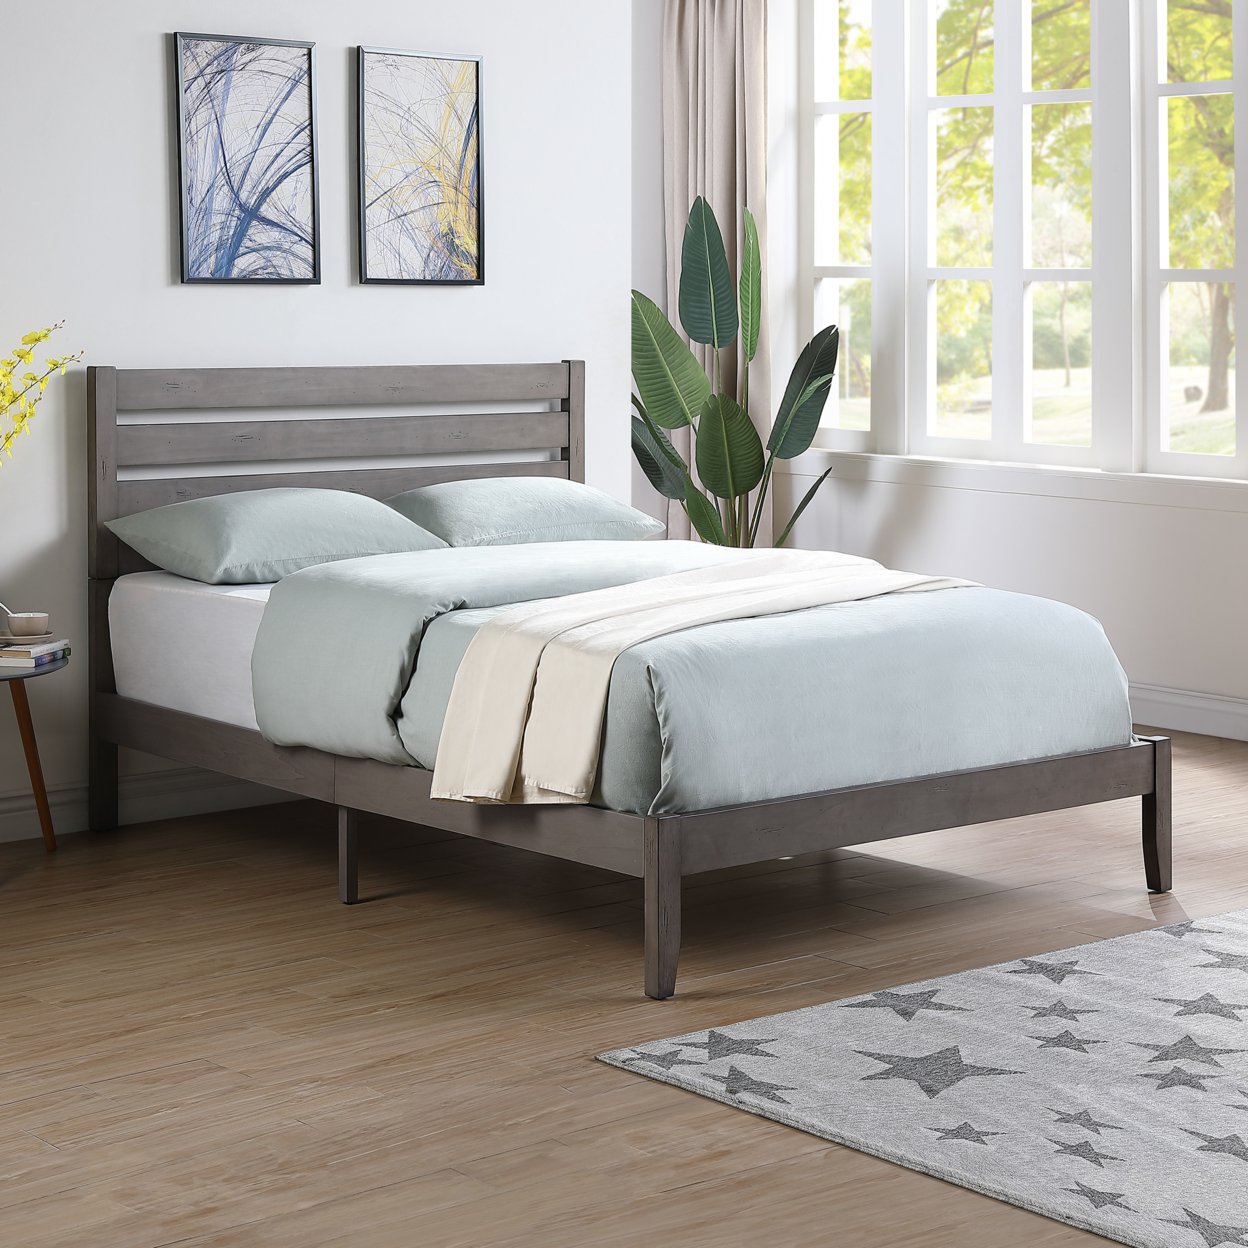 Kenley Queen Size Bed With Headboard - Gray Finish + Natural